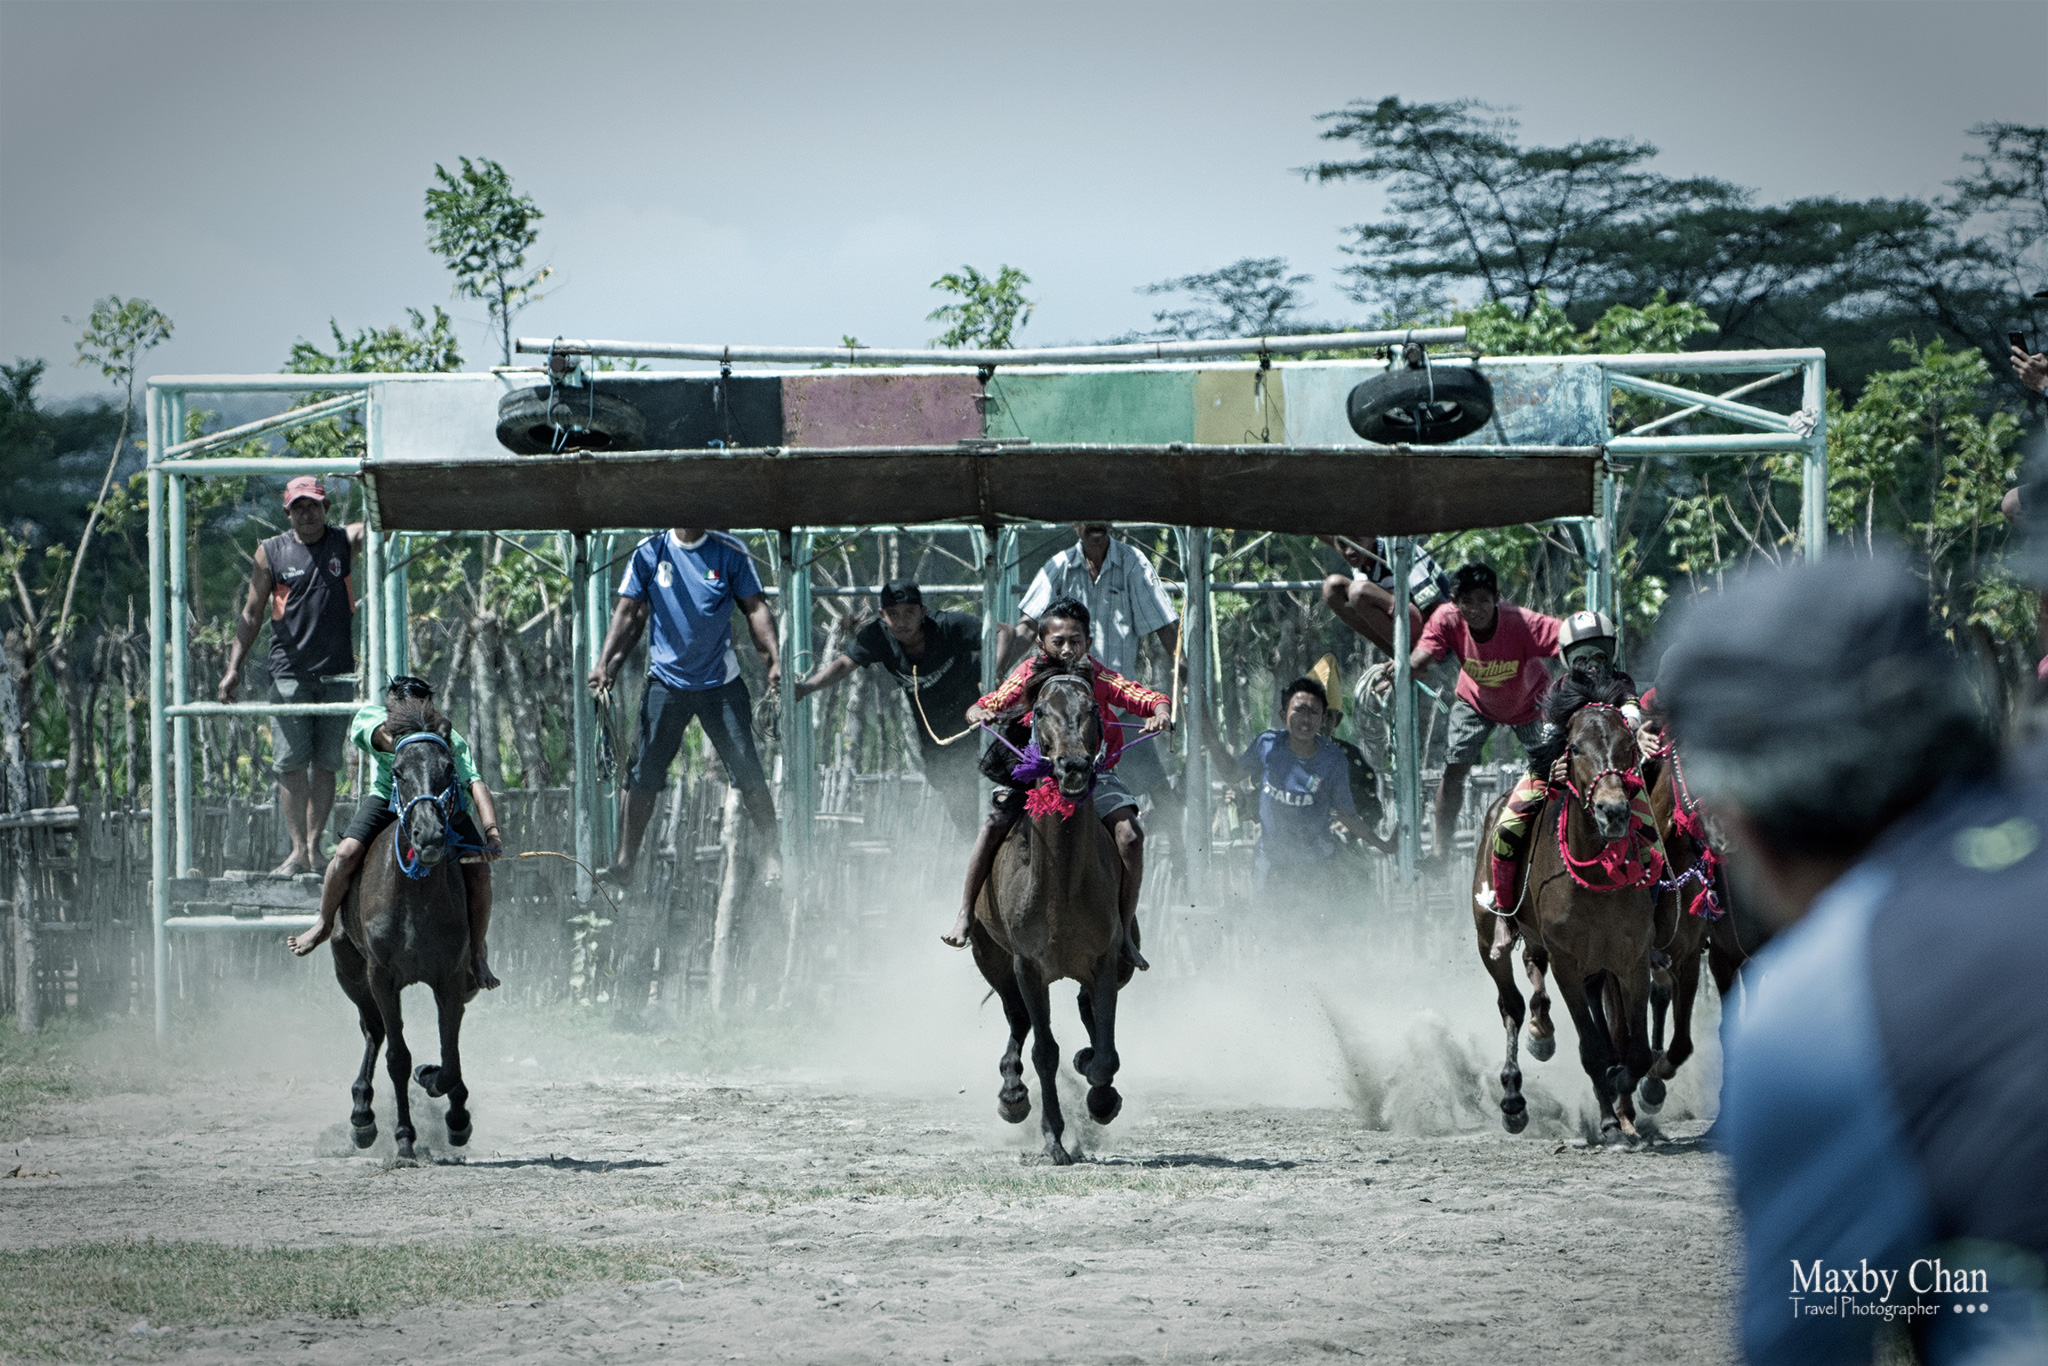 The start of the horse race at the gates.